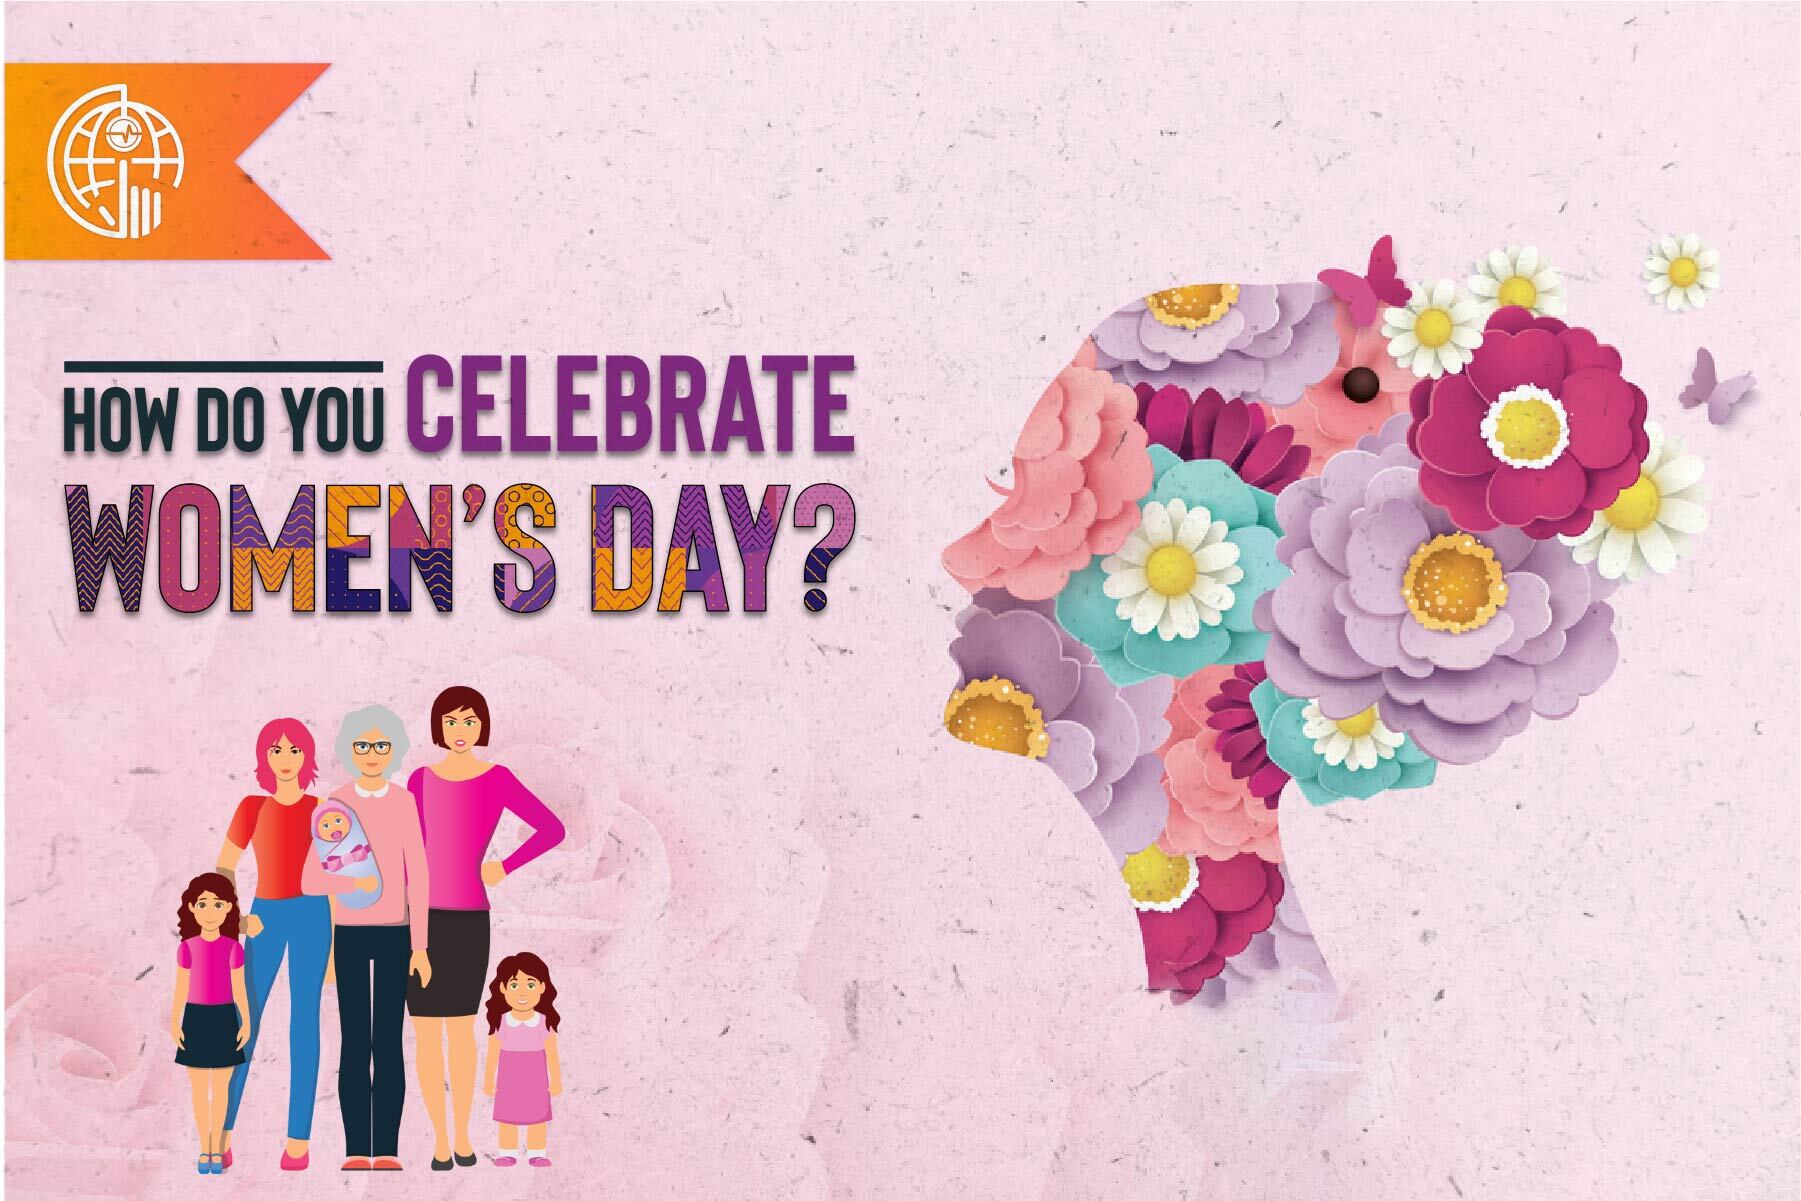 How do you Celebrate Women’s Day?